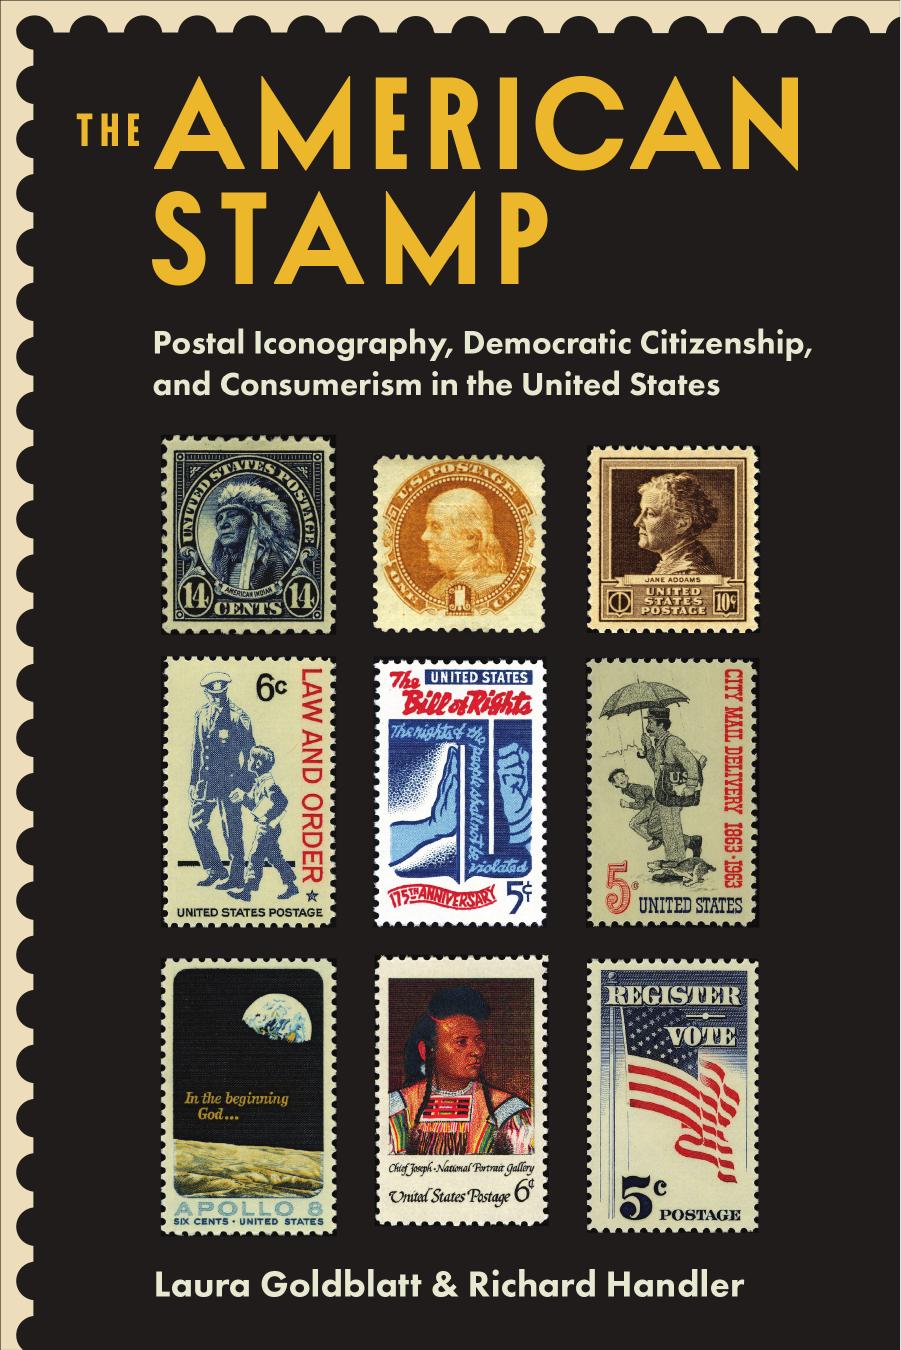 The American Stamp: Postal Iconography, Democratic Citizenship, and Consumerism in the United States by Laura Goldblatt Richard Handler